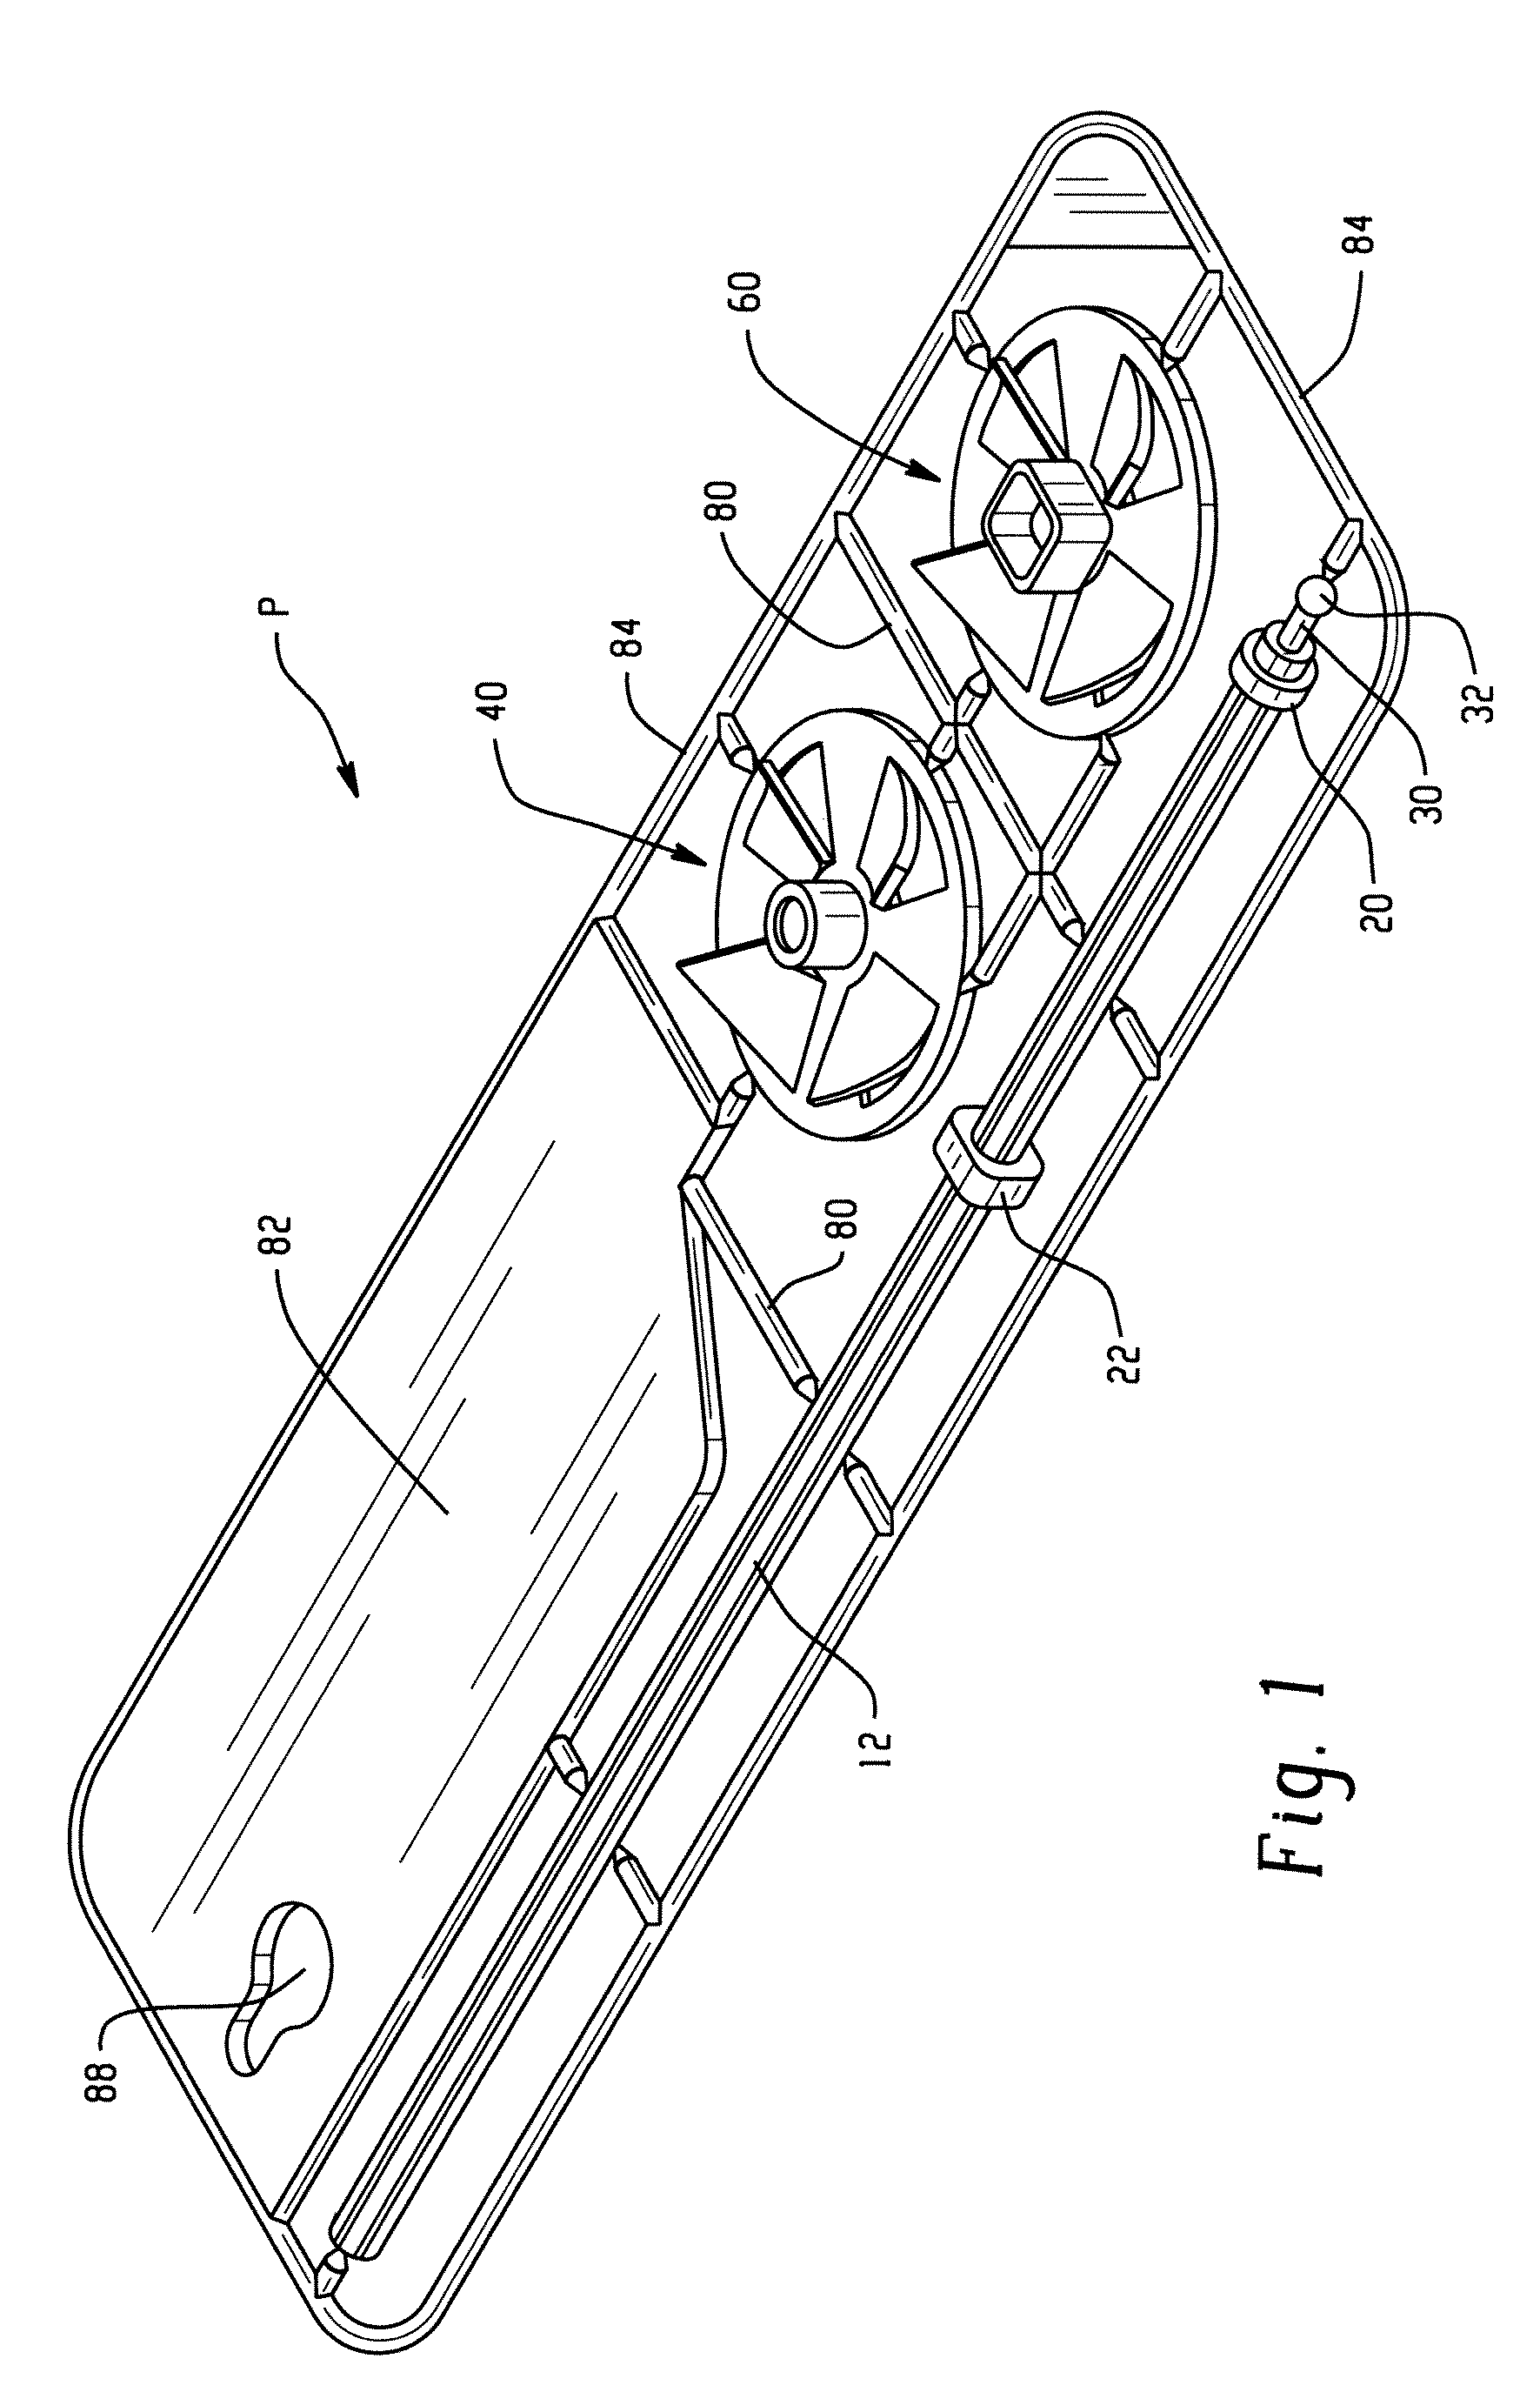 Rotary mixing device in molded packaging